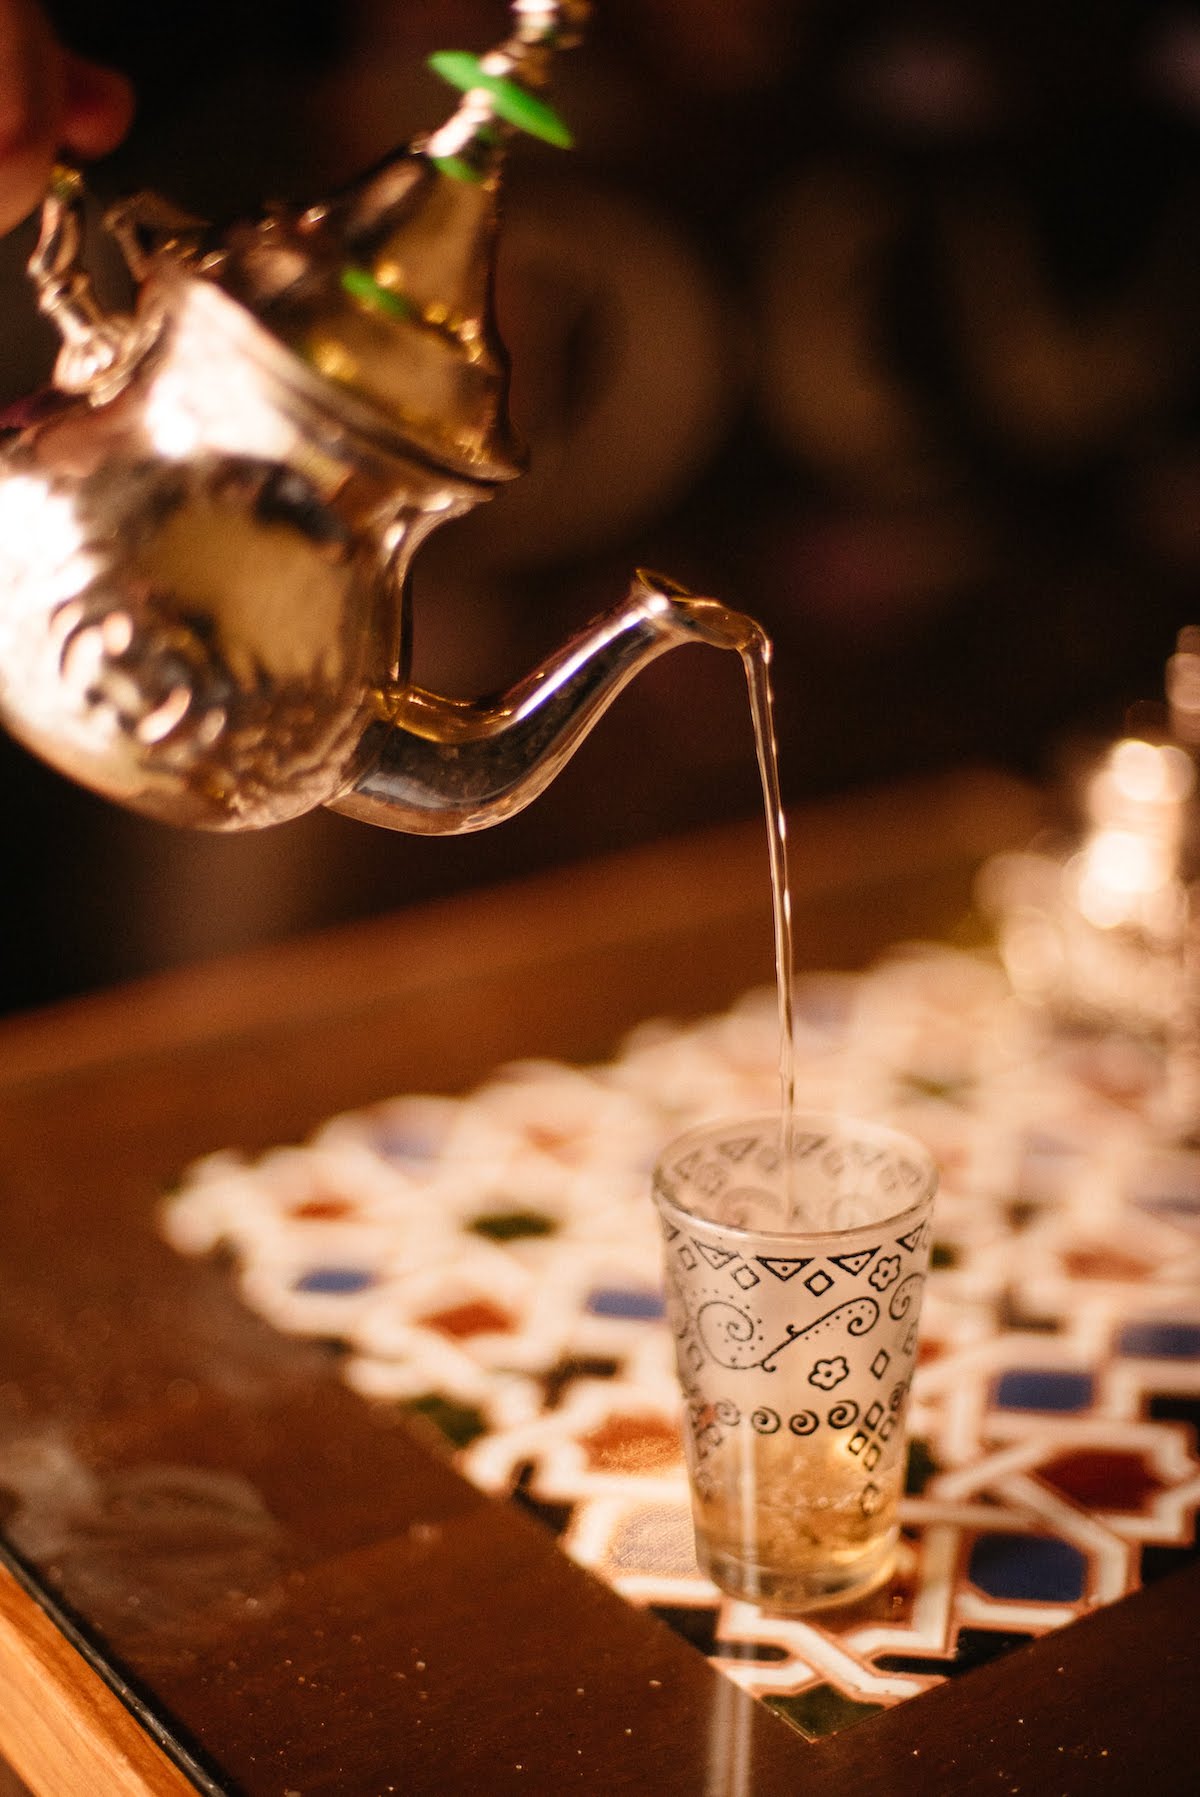 Moroccan tea being poured from a metal teapot into a handleless glass cup on a tiled table.